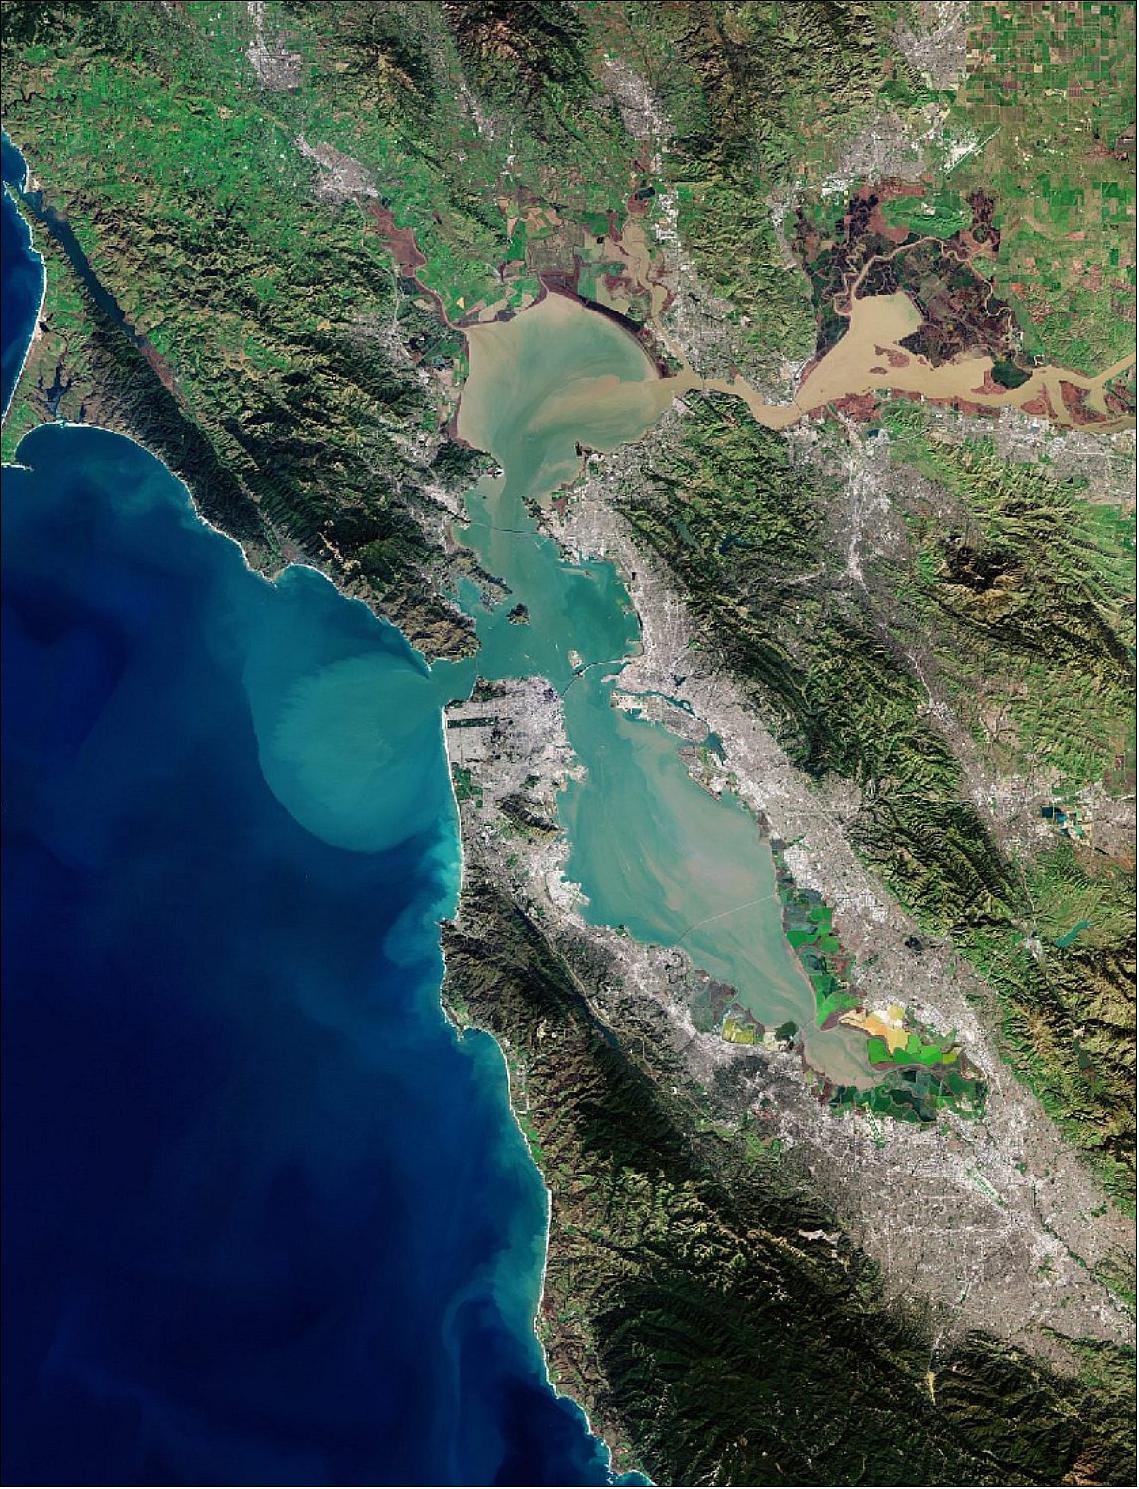 Figure 39: In the upper right of the image, the delta of the Sacramento and San Joaquin rivers is visible – with the brown, sediment-filled water flowing down into San Pablo Bay. Here, the murky waters mix before flowing into the larger bay area, which is connected to the Pacific Ocean via the Golden Gate strait. A large sediment plume can be seen travelling westward into the Pacific in the left of the image. This image, captured on 25 January 2019, is also featured on the Earth from Space video program (image credit: ESA, the image contains modified Copernicus Sentinel data (2019), processed by ESA, CC BY-SA 3.0 IGO)